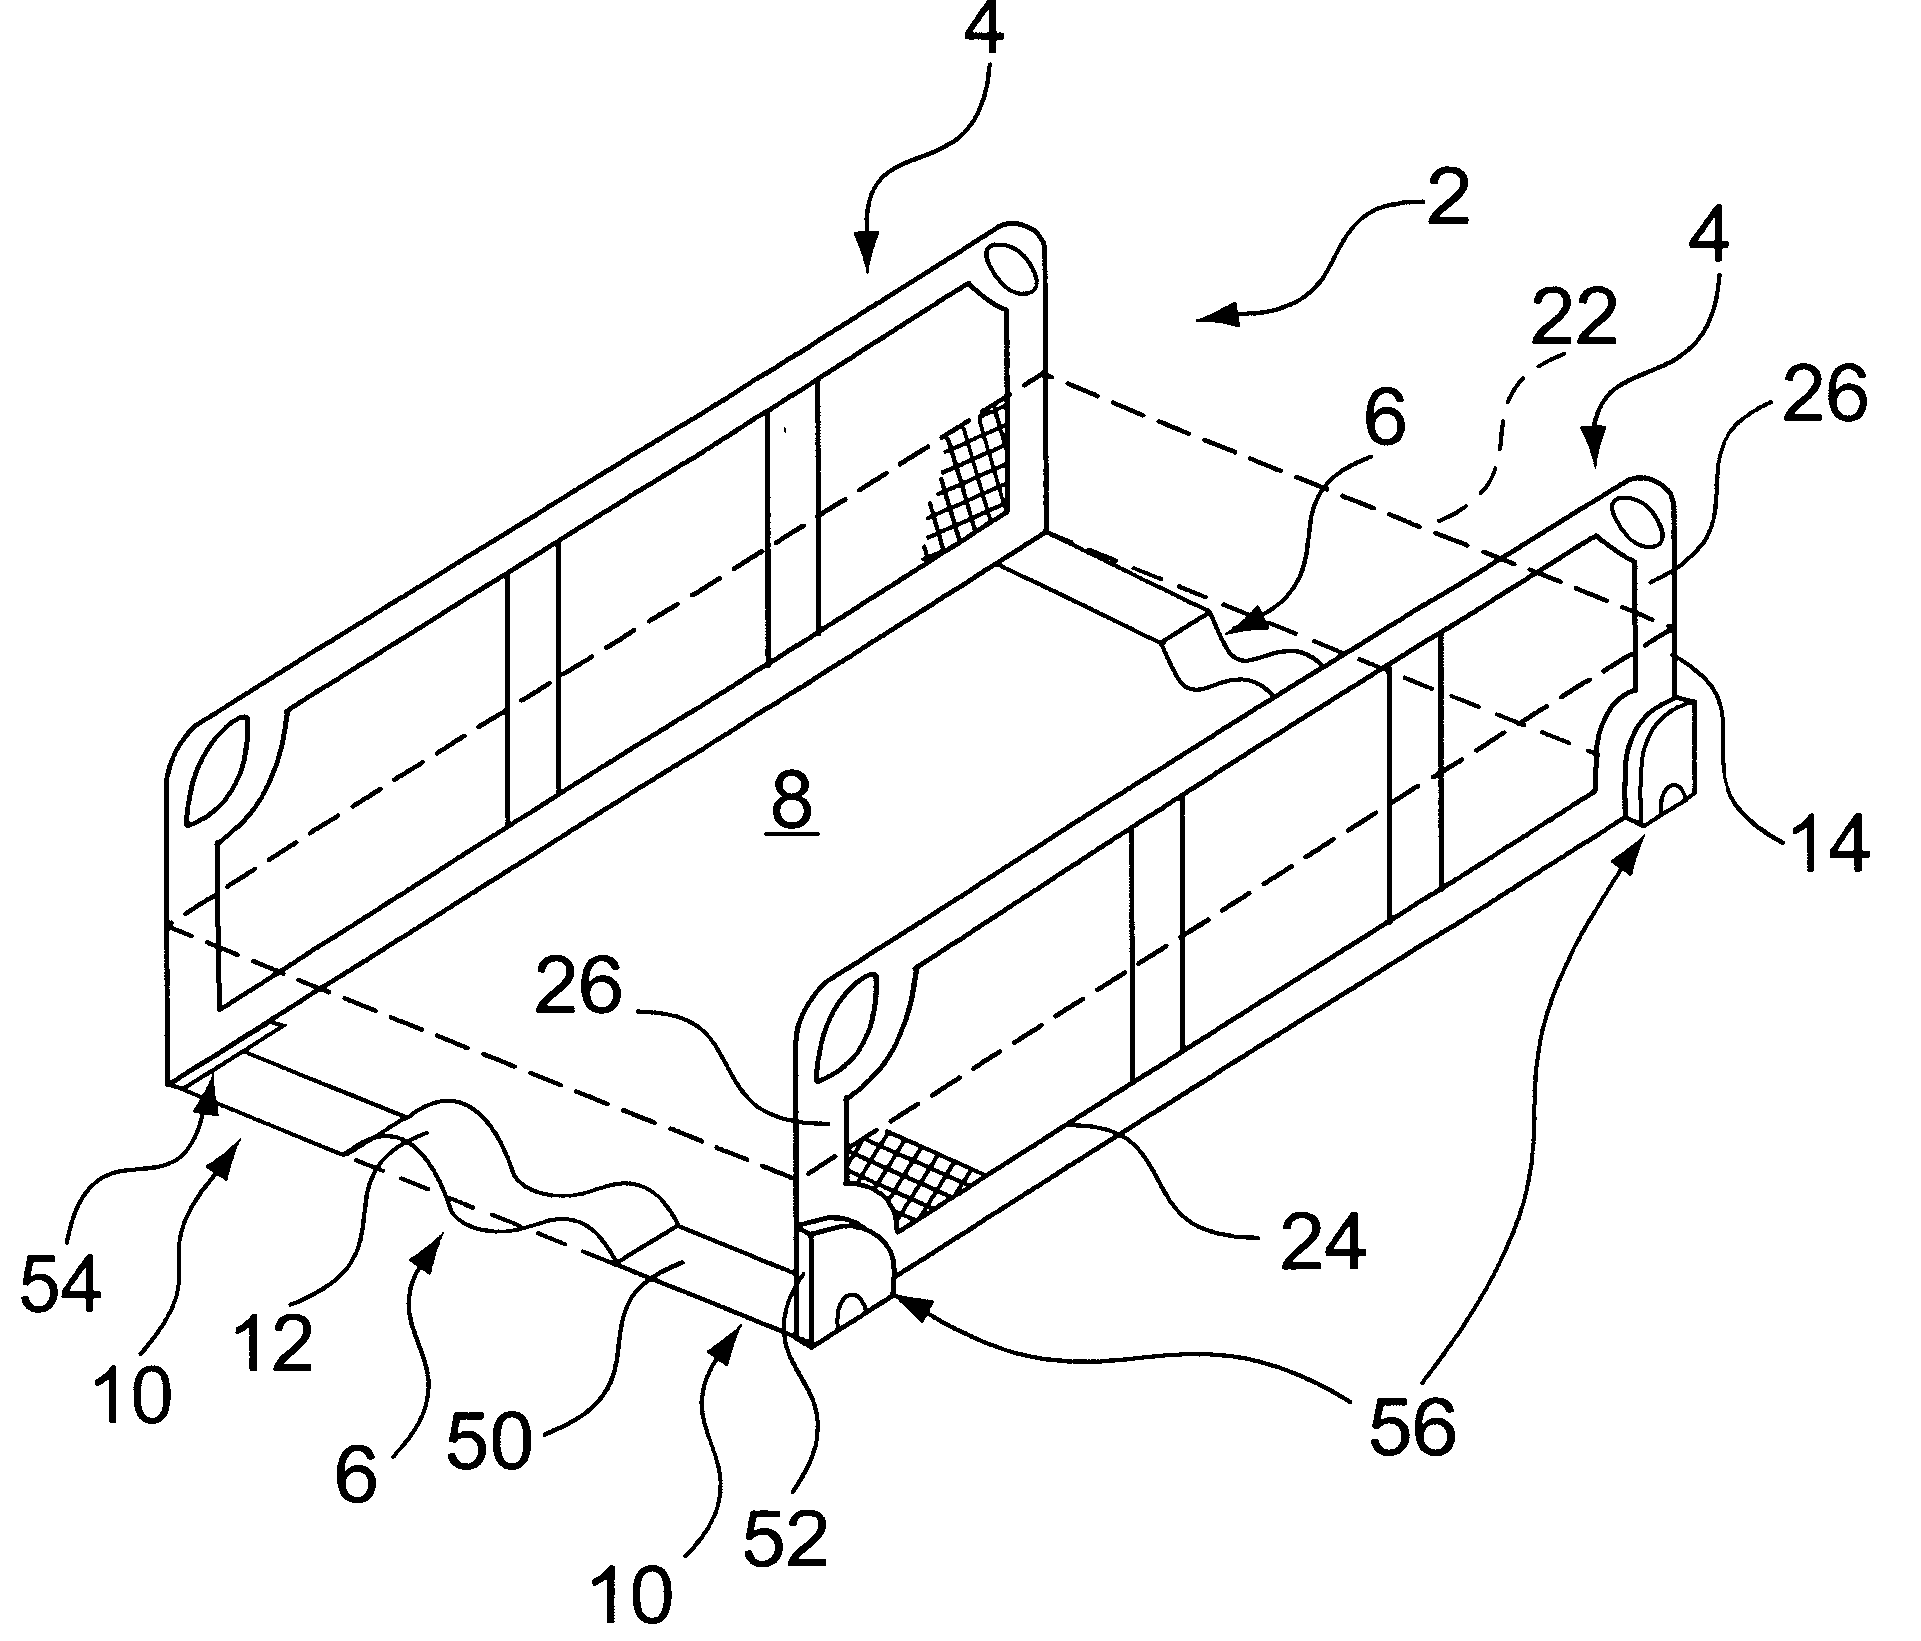 Bed guard assembly